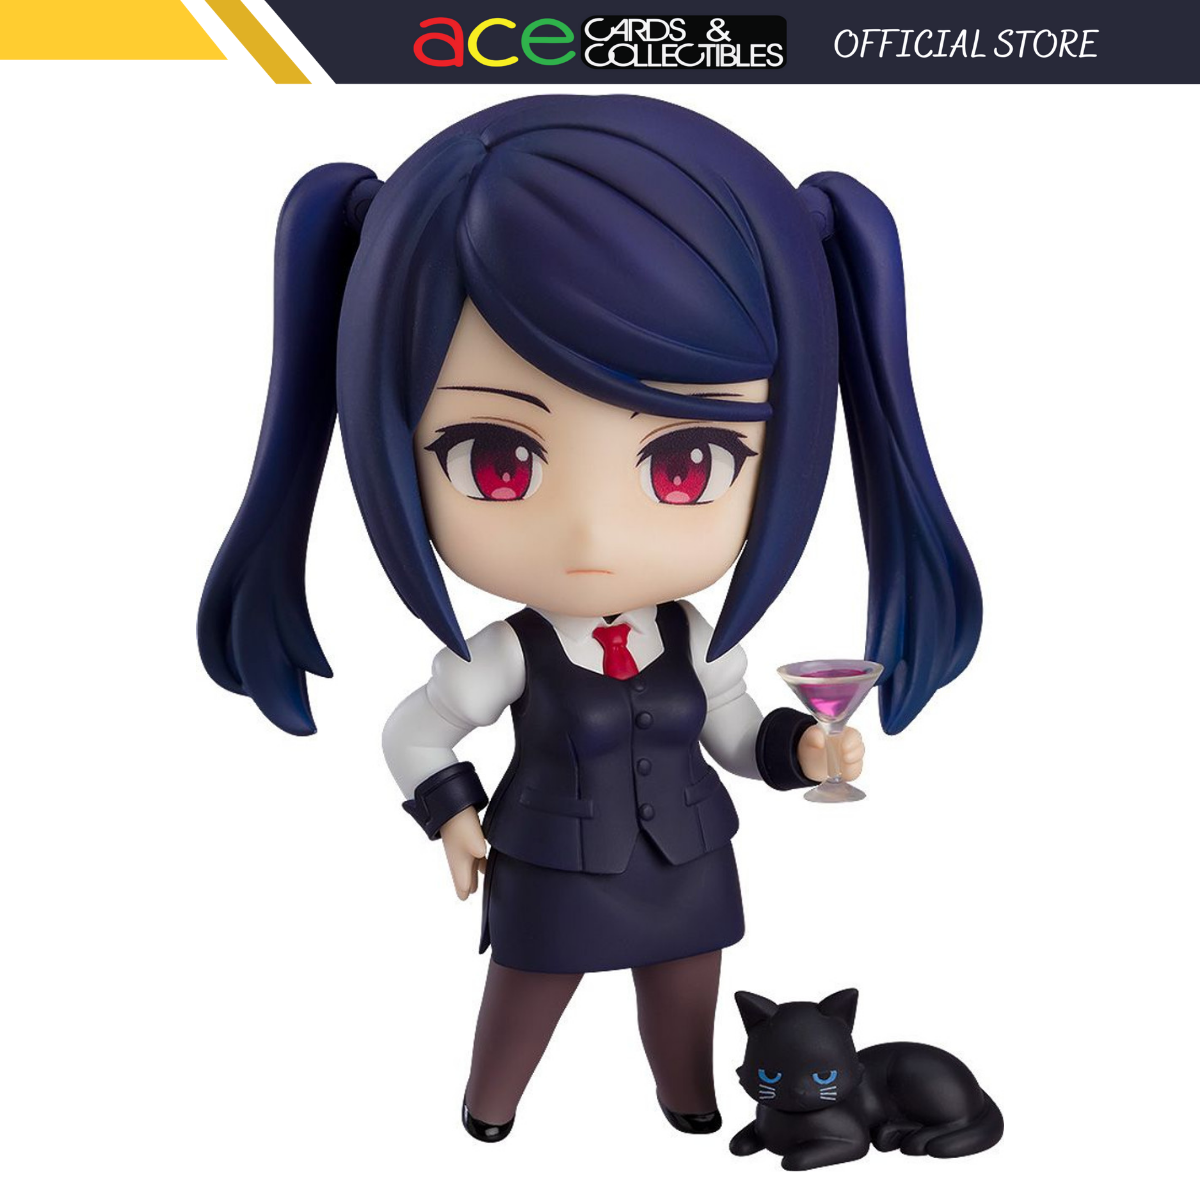 Good Smile Company Tagged Nendoroid Page 5 - Ace Cards